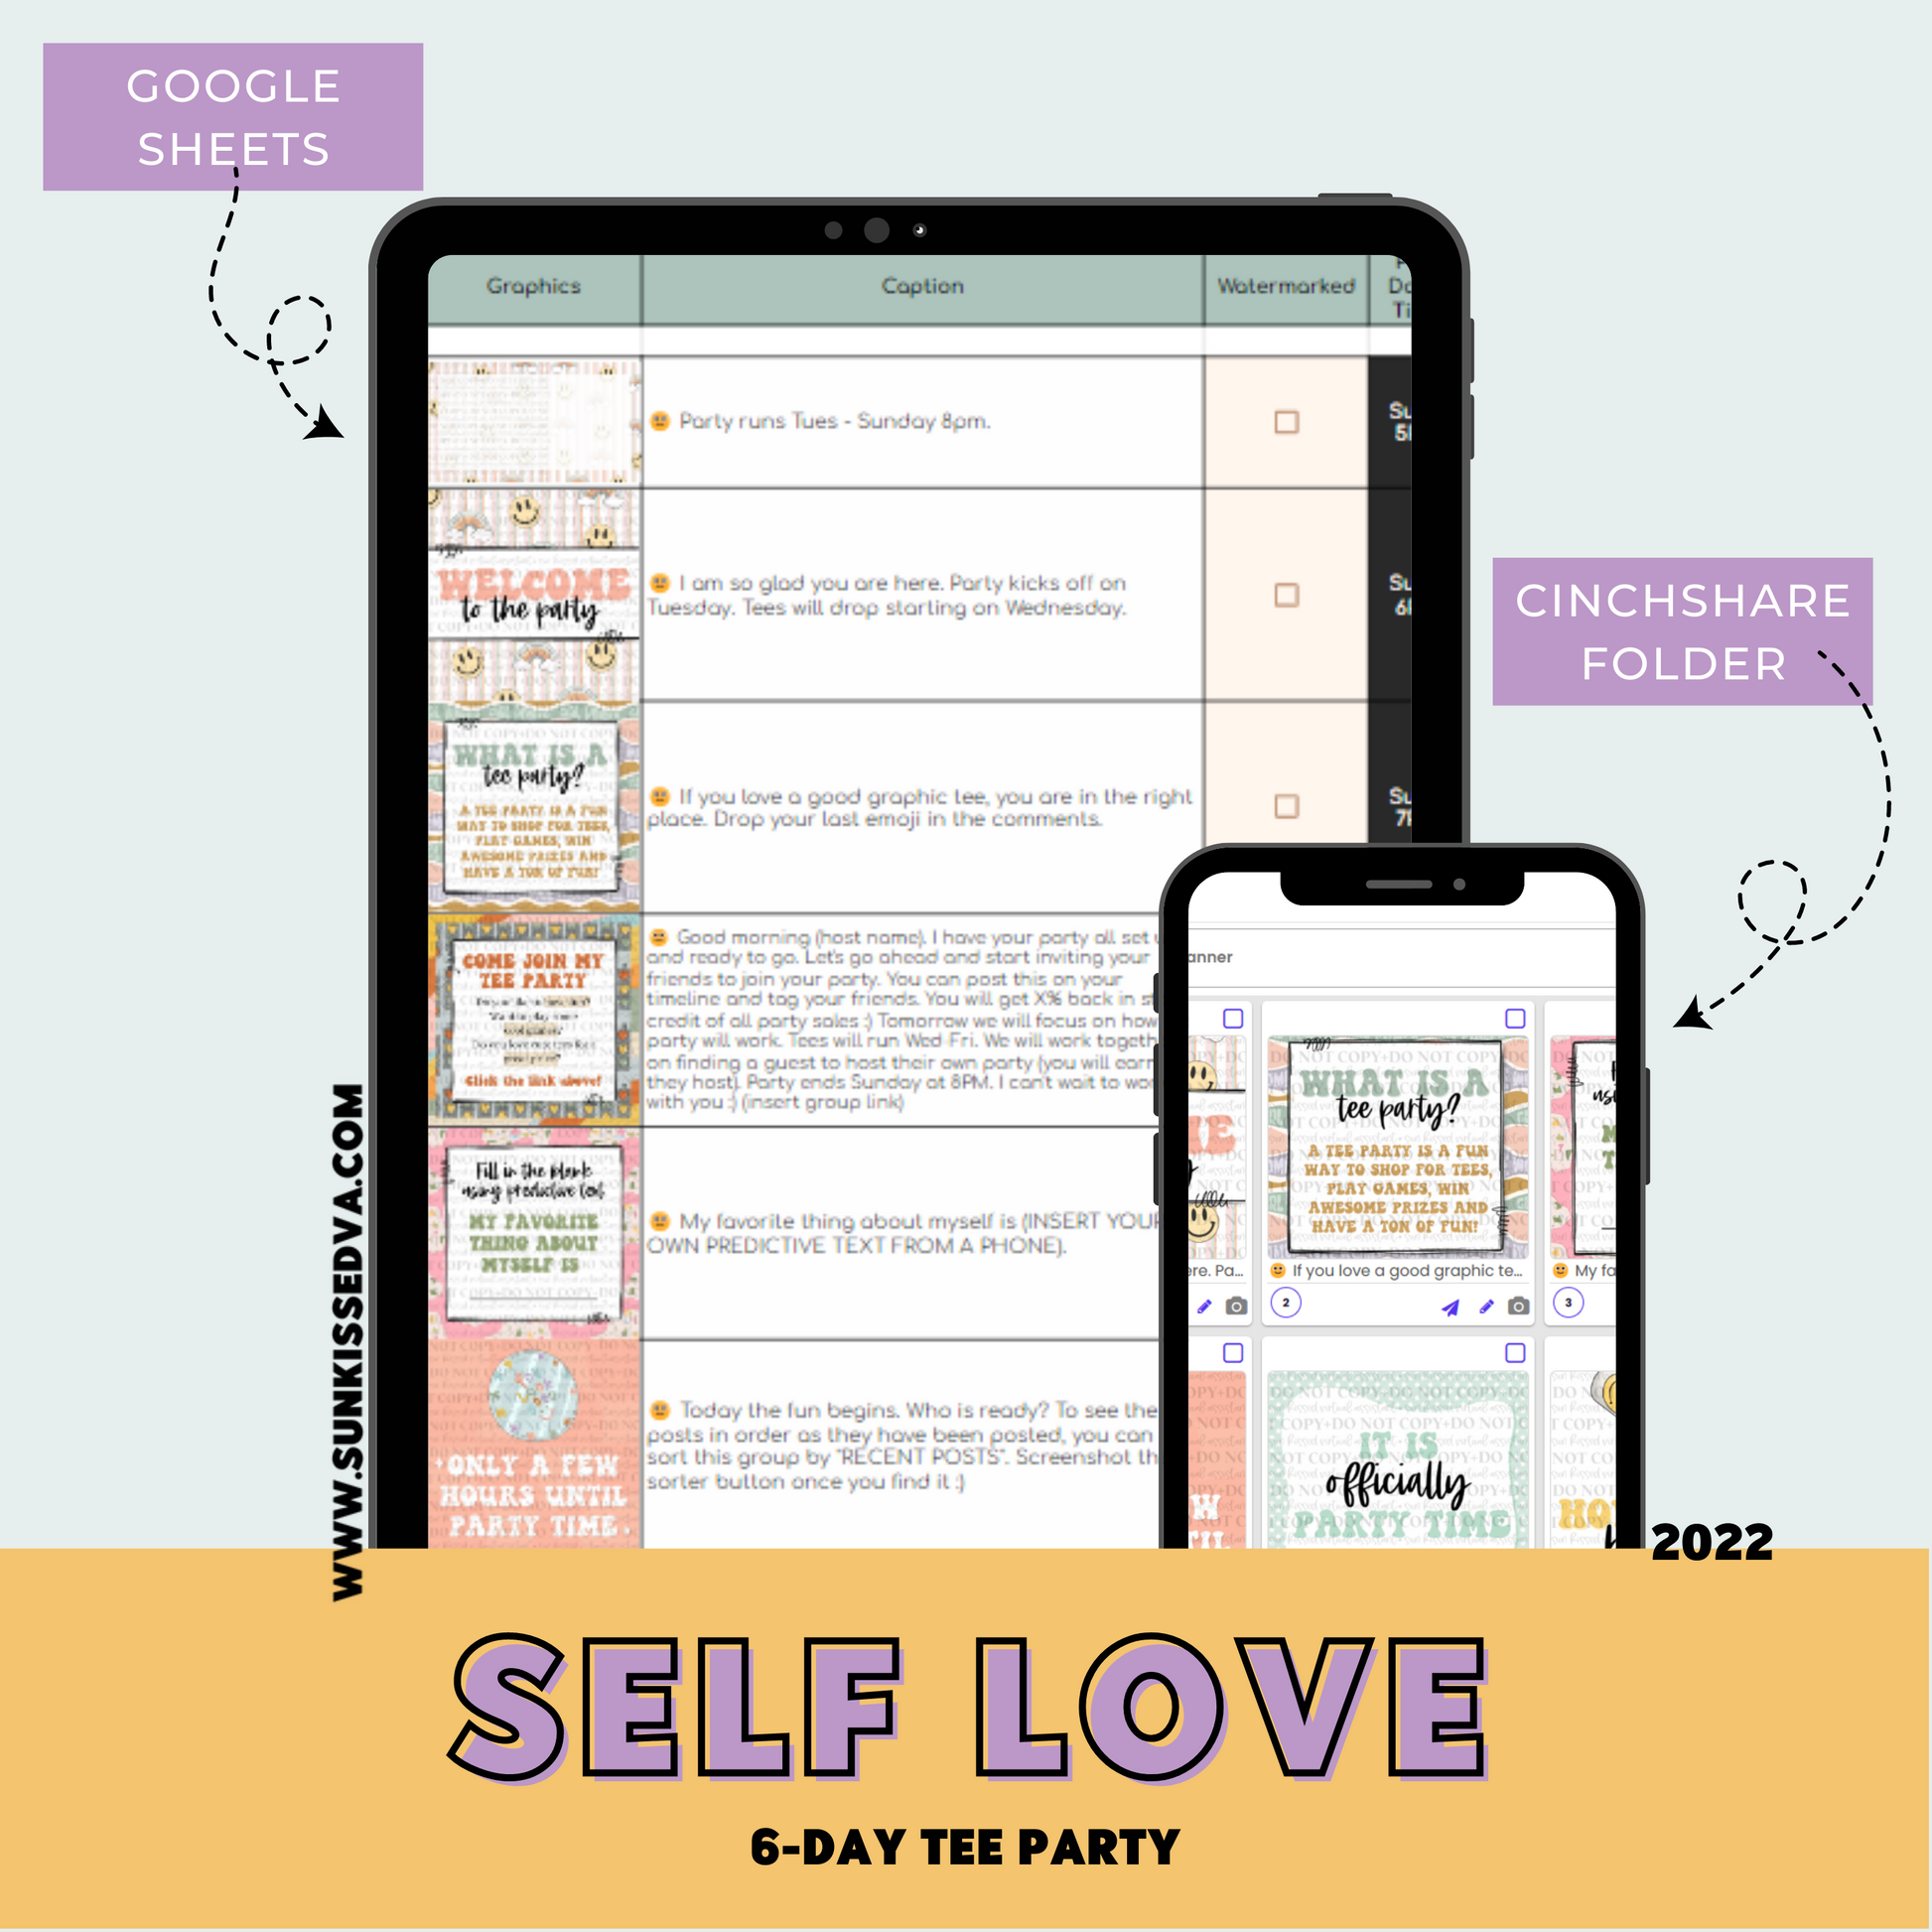 Self Love Tee Party Planner | Sun Kissed Virtual Assistant